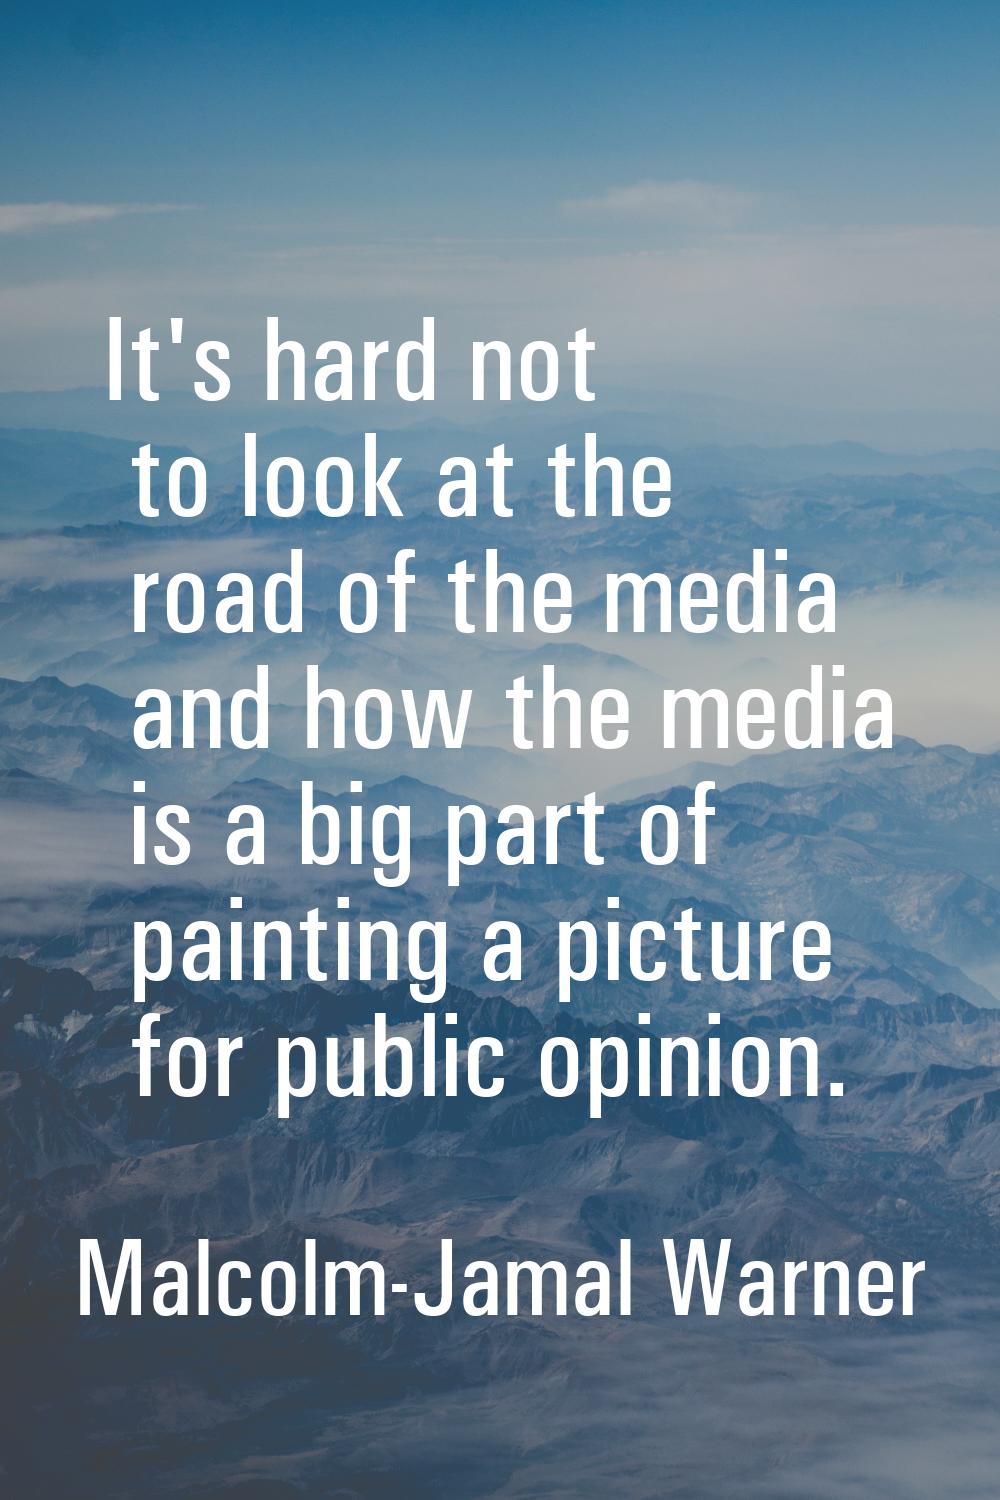 It's hard not to look at the road of the media and how the media is a big part of painting a pictur